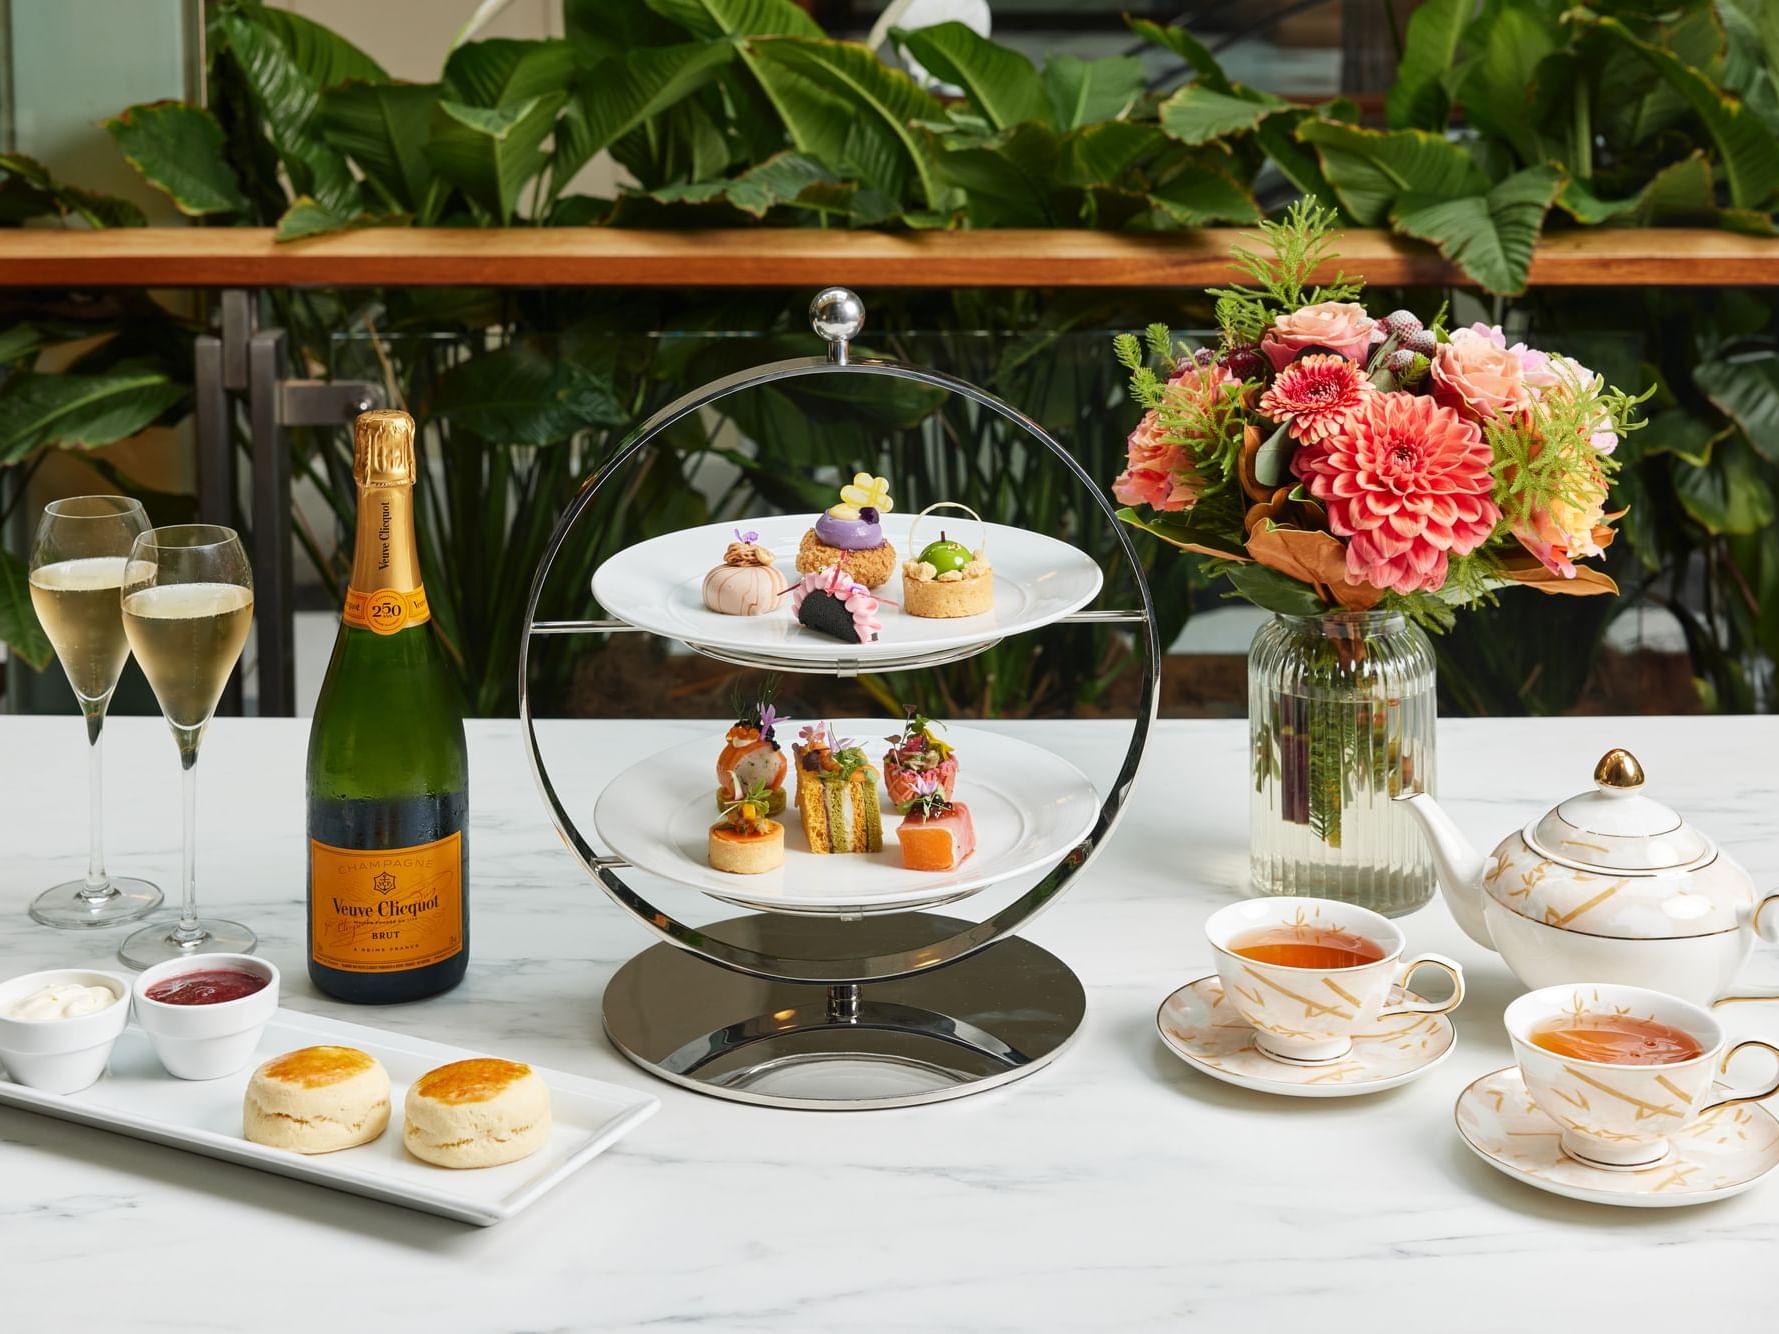 Outdoor high tea set-up with sweets and champagne served at Fullerton Group